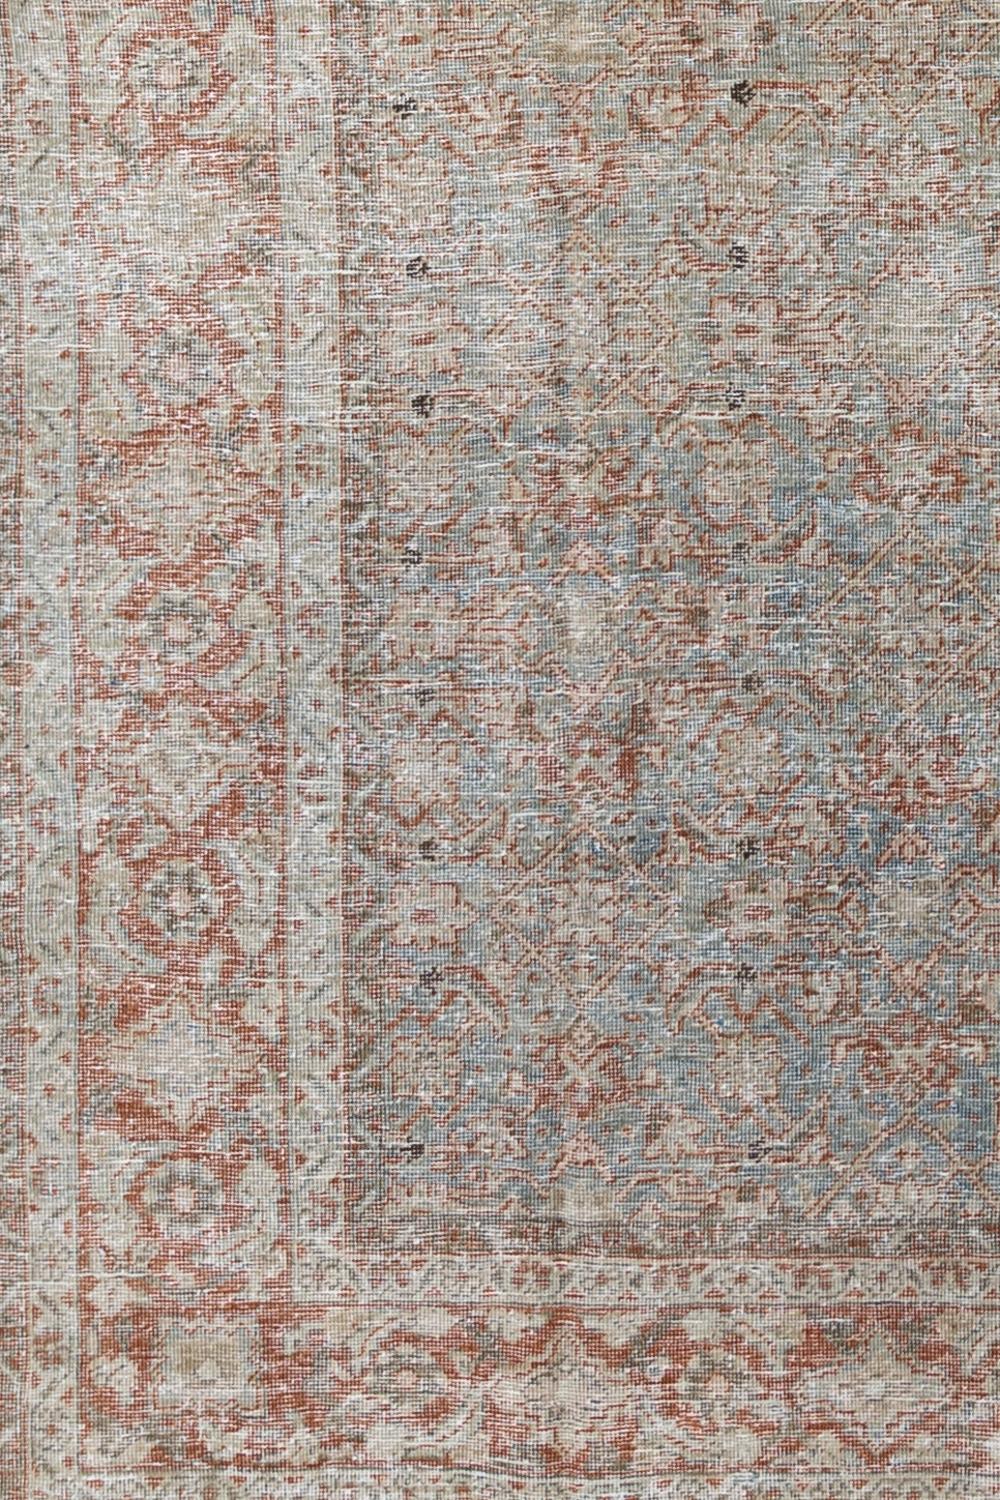 Age: 1920

Pile: Low

Wear Notes: 5-6

Material: Wool on Cotton

Vintage rugs are made by hand over the course of months, sometimes years. Their imperfections and wear are evidence of the hard working human hands that made them and the